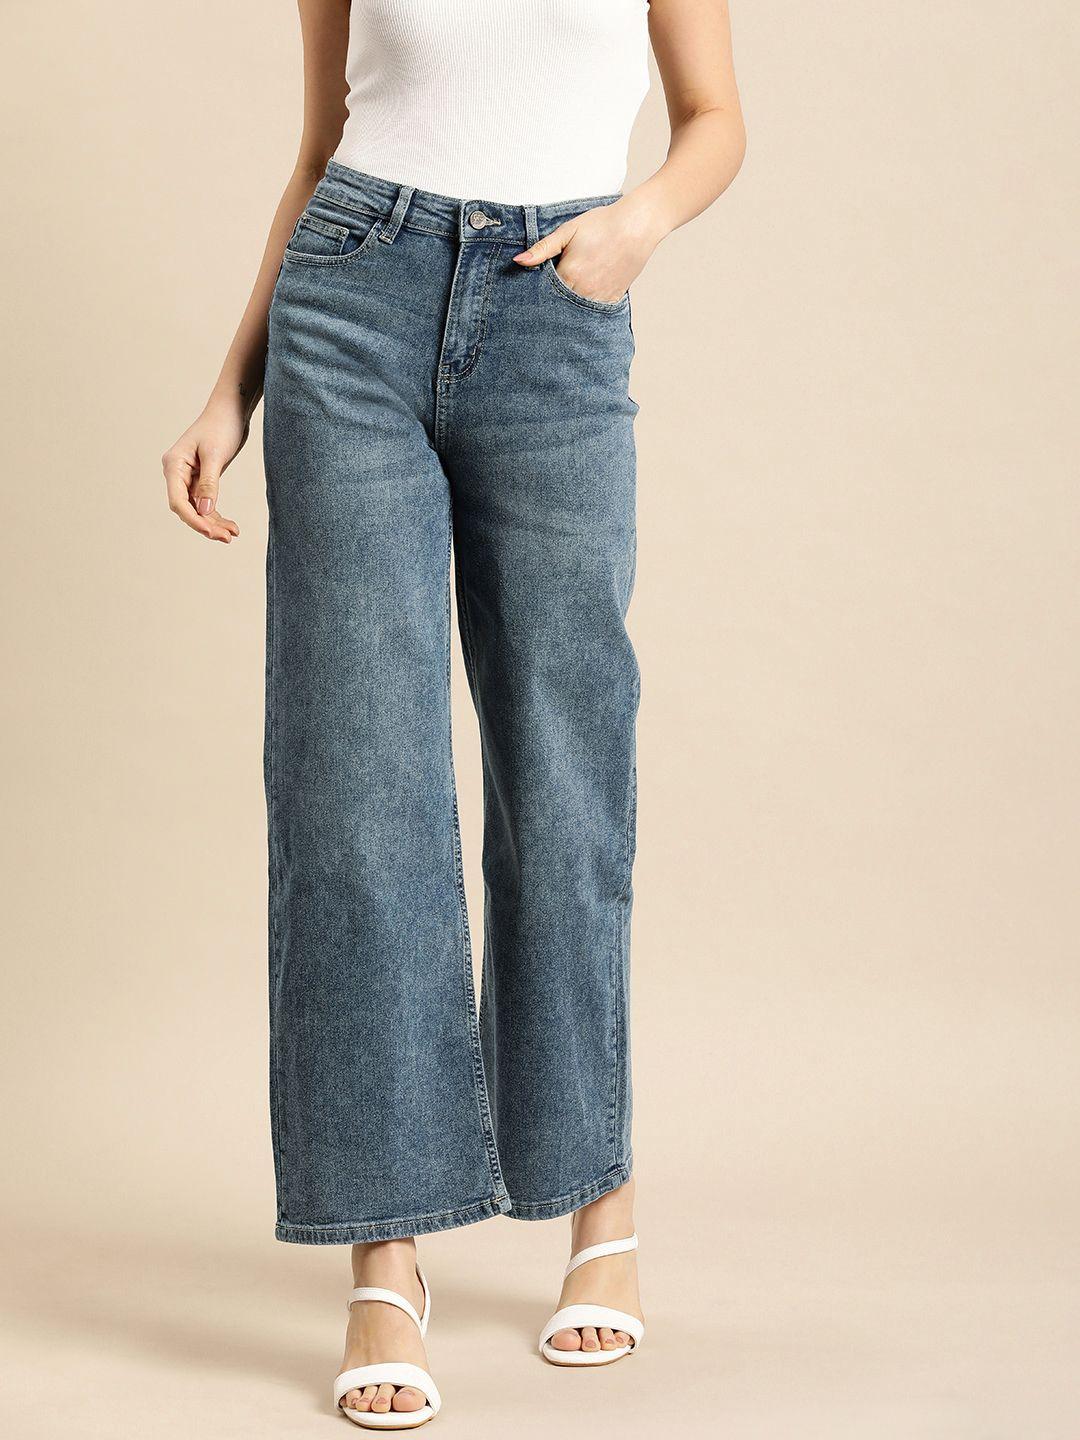 all-about-you-women-wide-leg-heavy-fade-stretchable-mid-rise-jeans